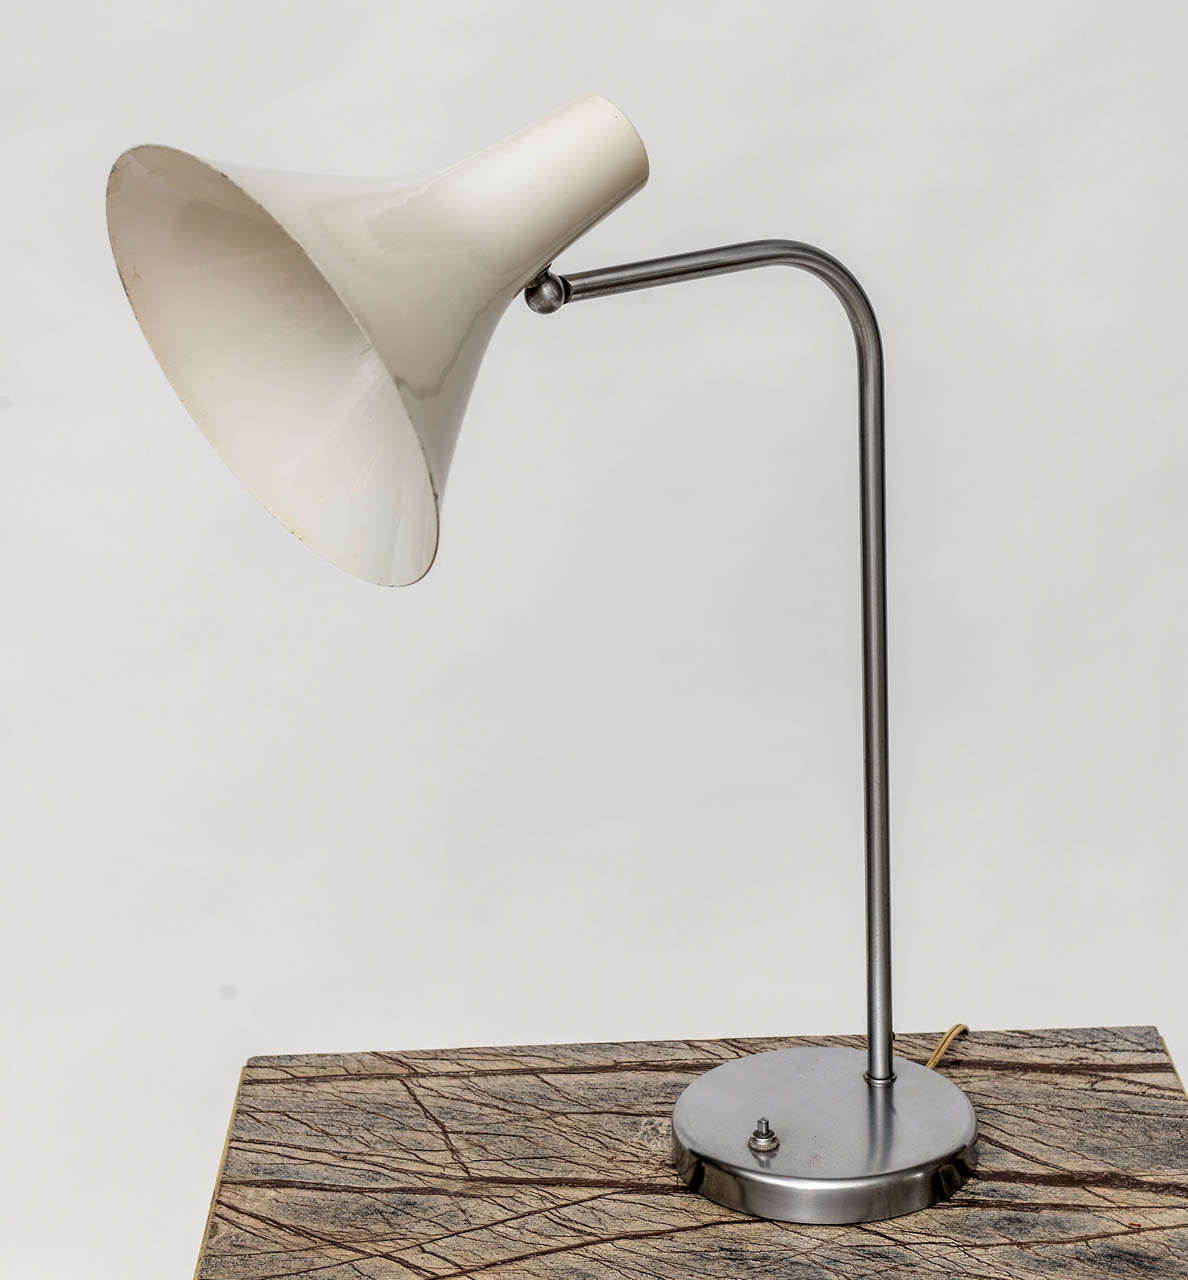 Perfect in their simplicity, these 1960's task lamps by Nessen Studios feature pivoting white enameled shades (aged to a soft off-white) on brushed nickel bases. Rare to find in such good original condition. Please note that these lamps are sold